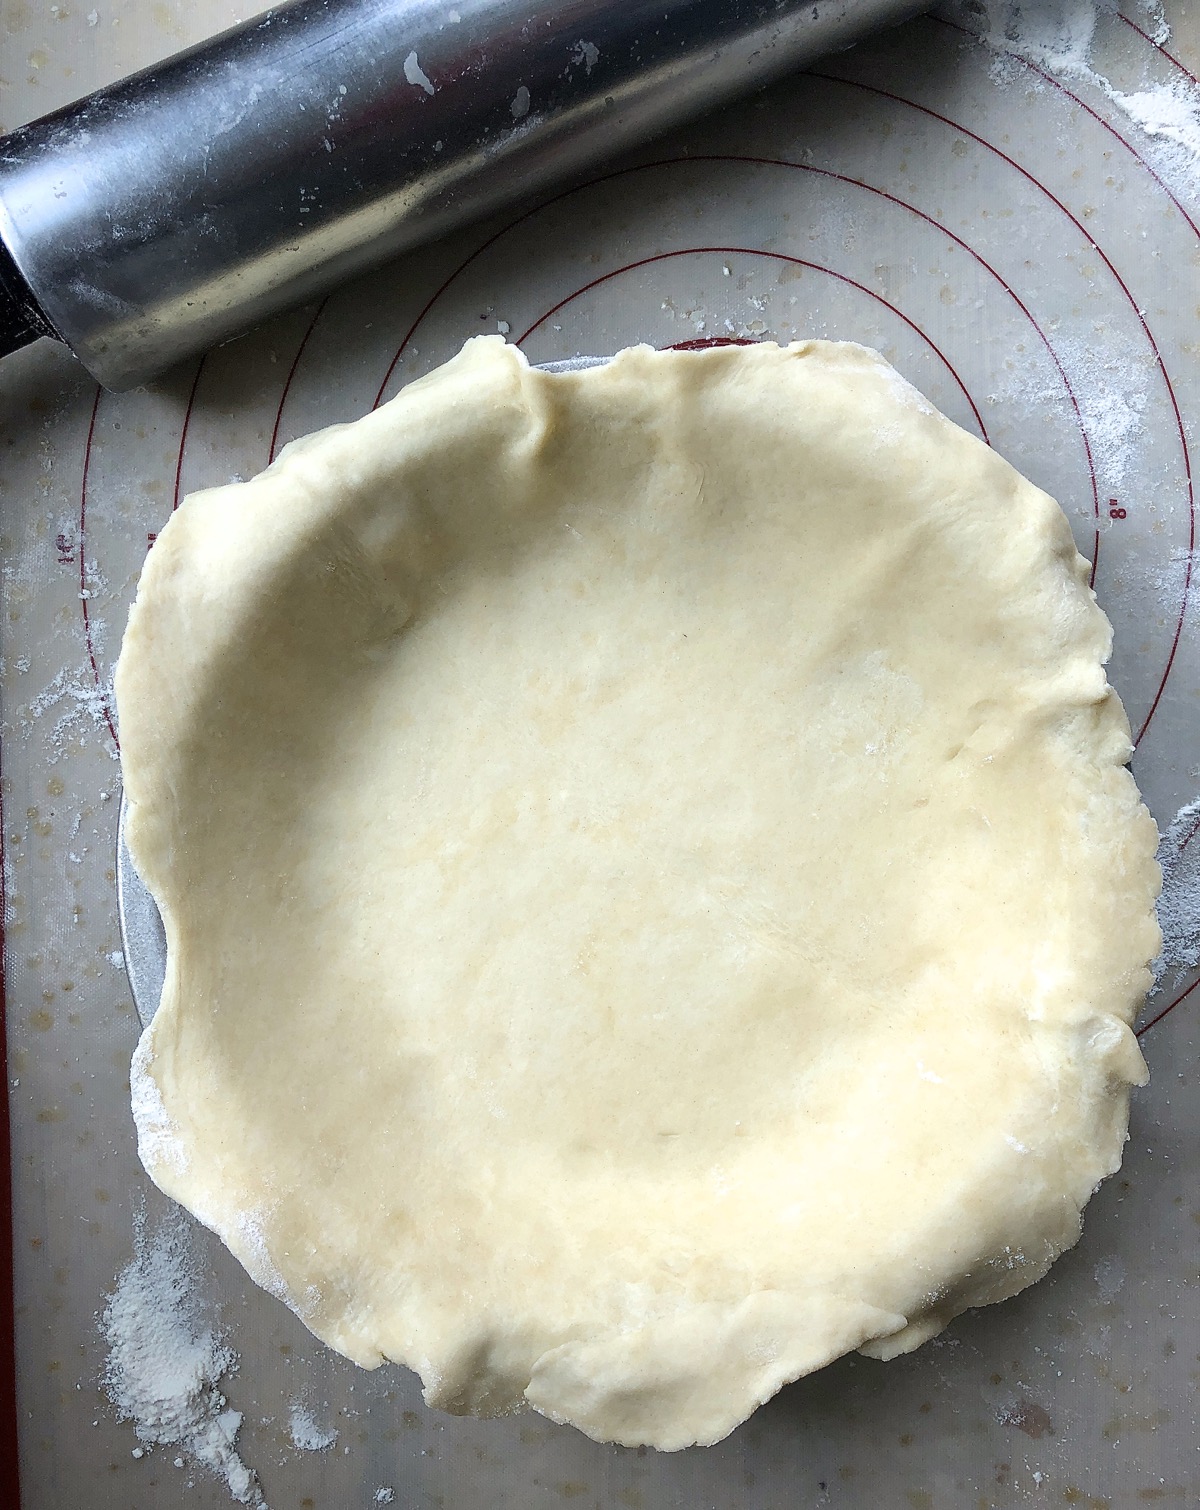 Super-flaky pie crust dough rolled into a bottom crust, placed in pan